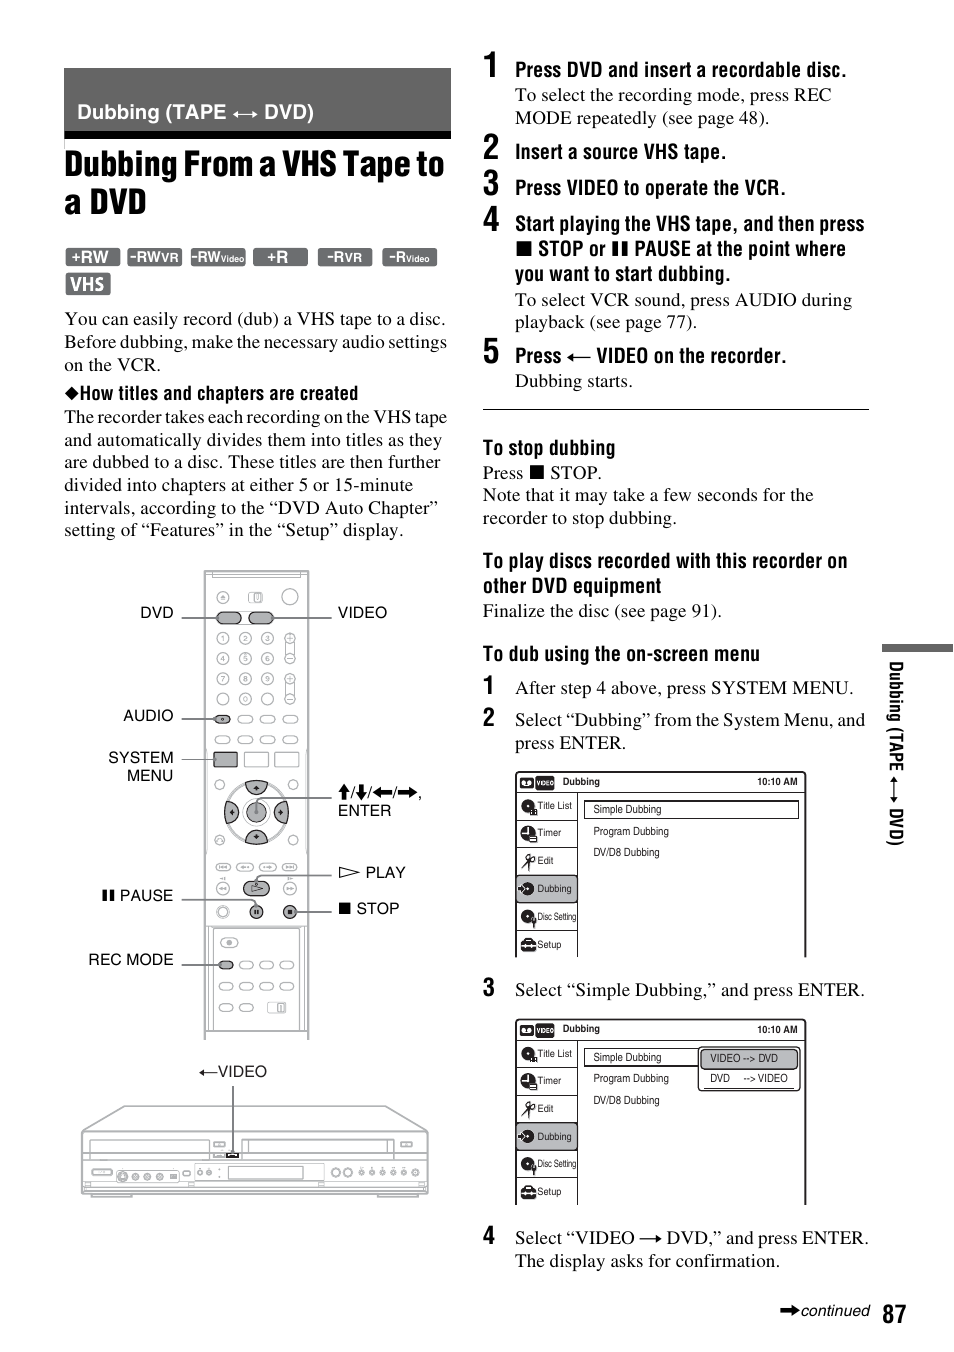 Dubbing (tape y dvd), Dubbing from a vhs tape to a dvd | Sony RDR-VX521 User Manual | Page 87 / 132